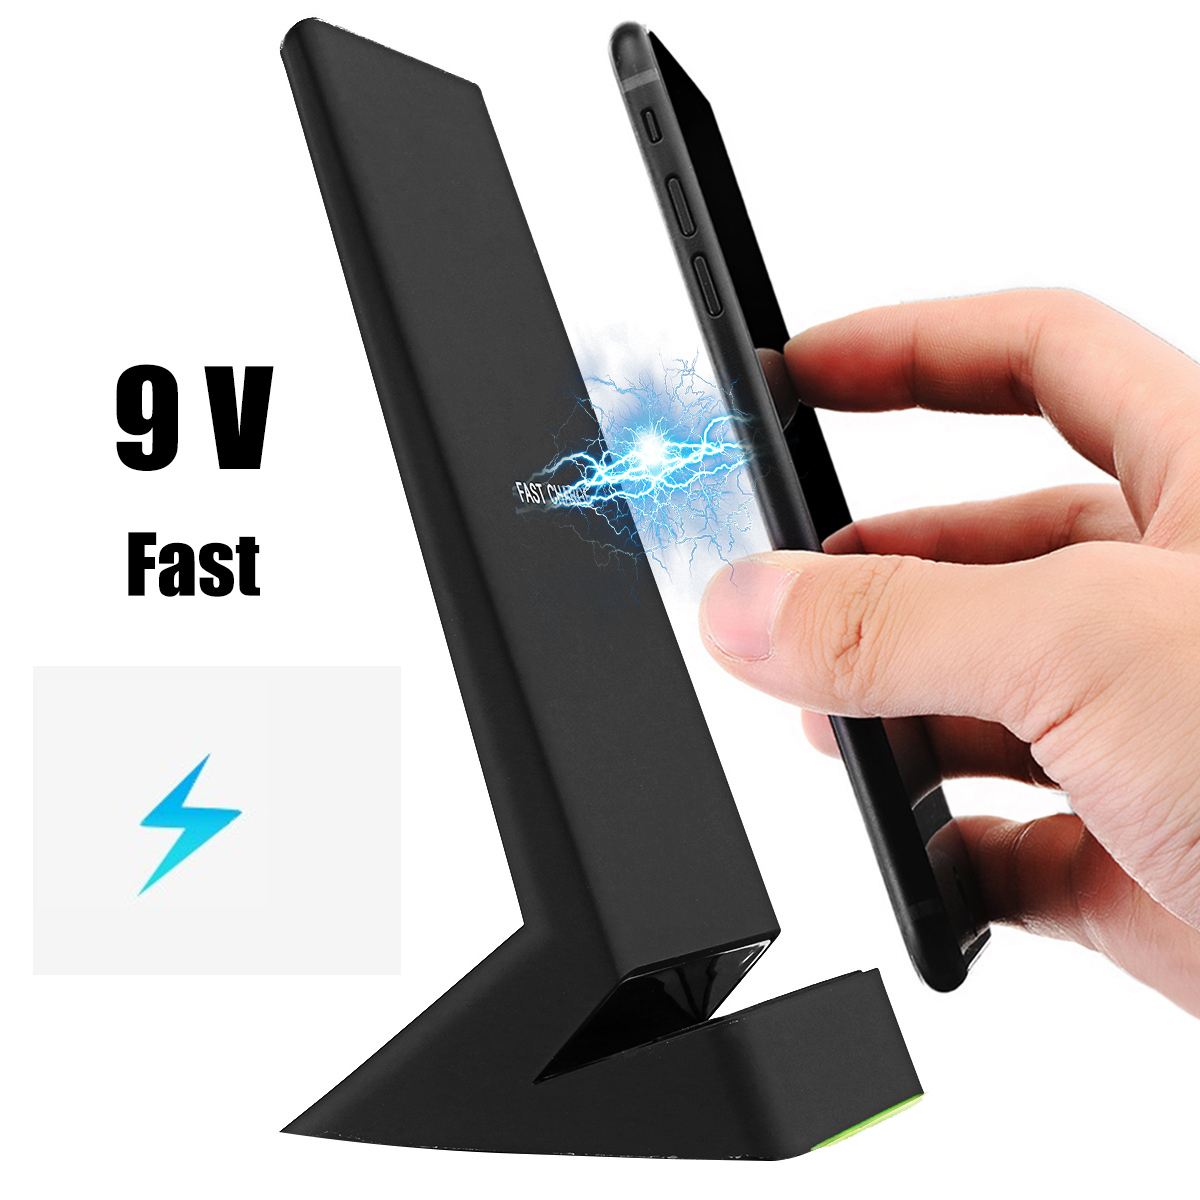 Bakeey Qi Wireless Fast Charger For iPhone X 8 8Plus Samsung S8 S7 Edge Note 8 